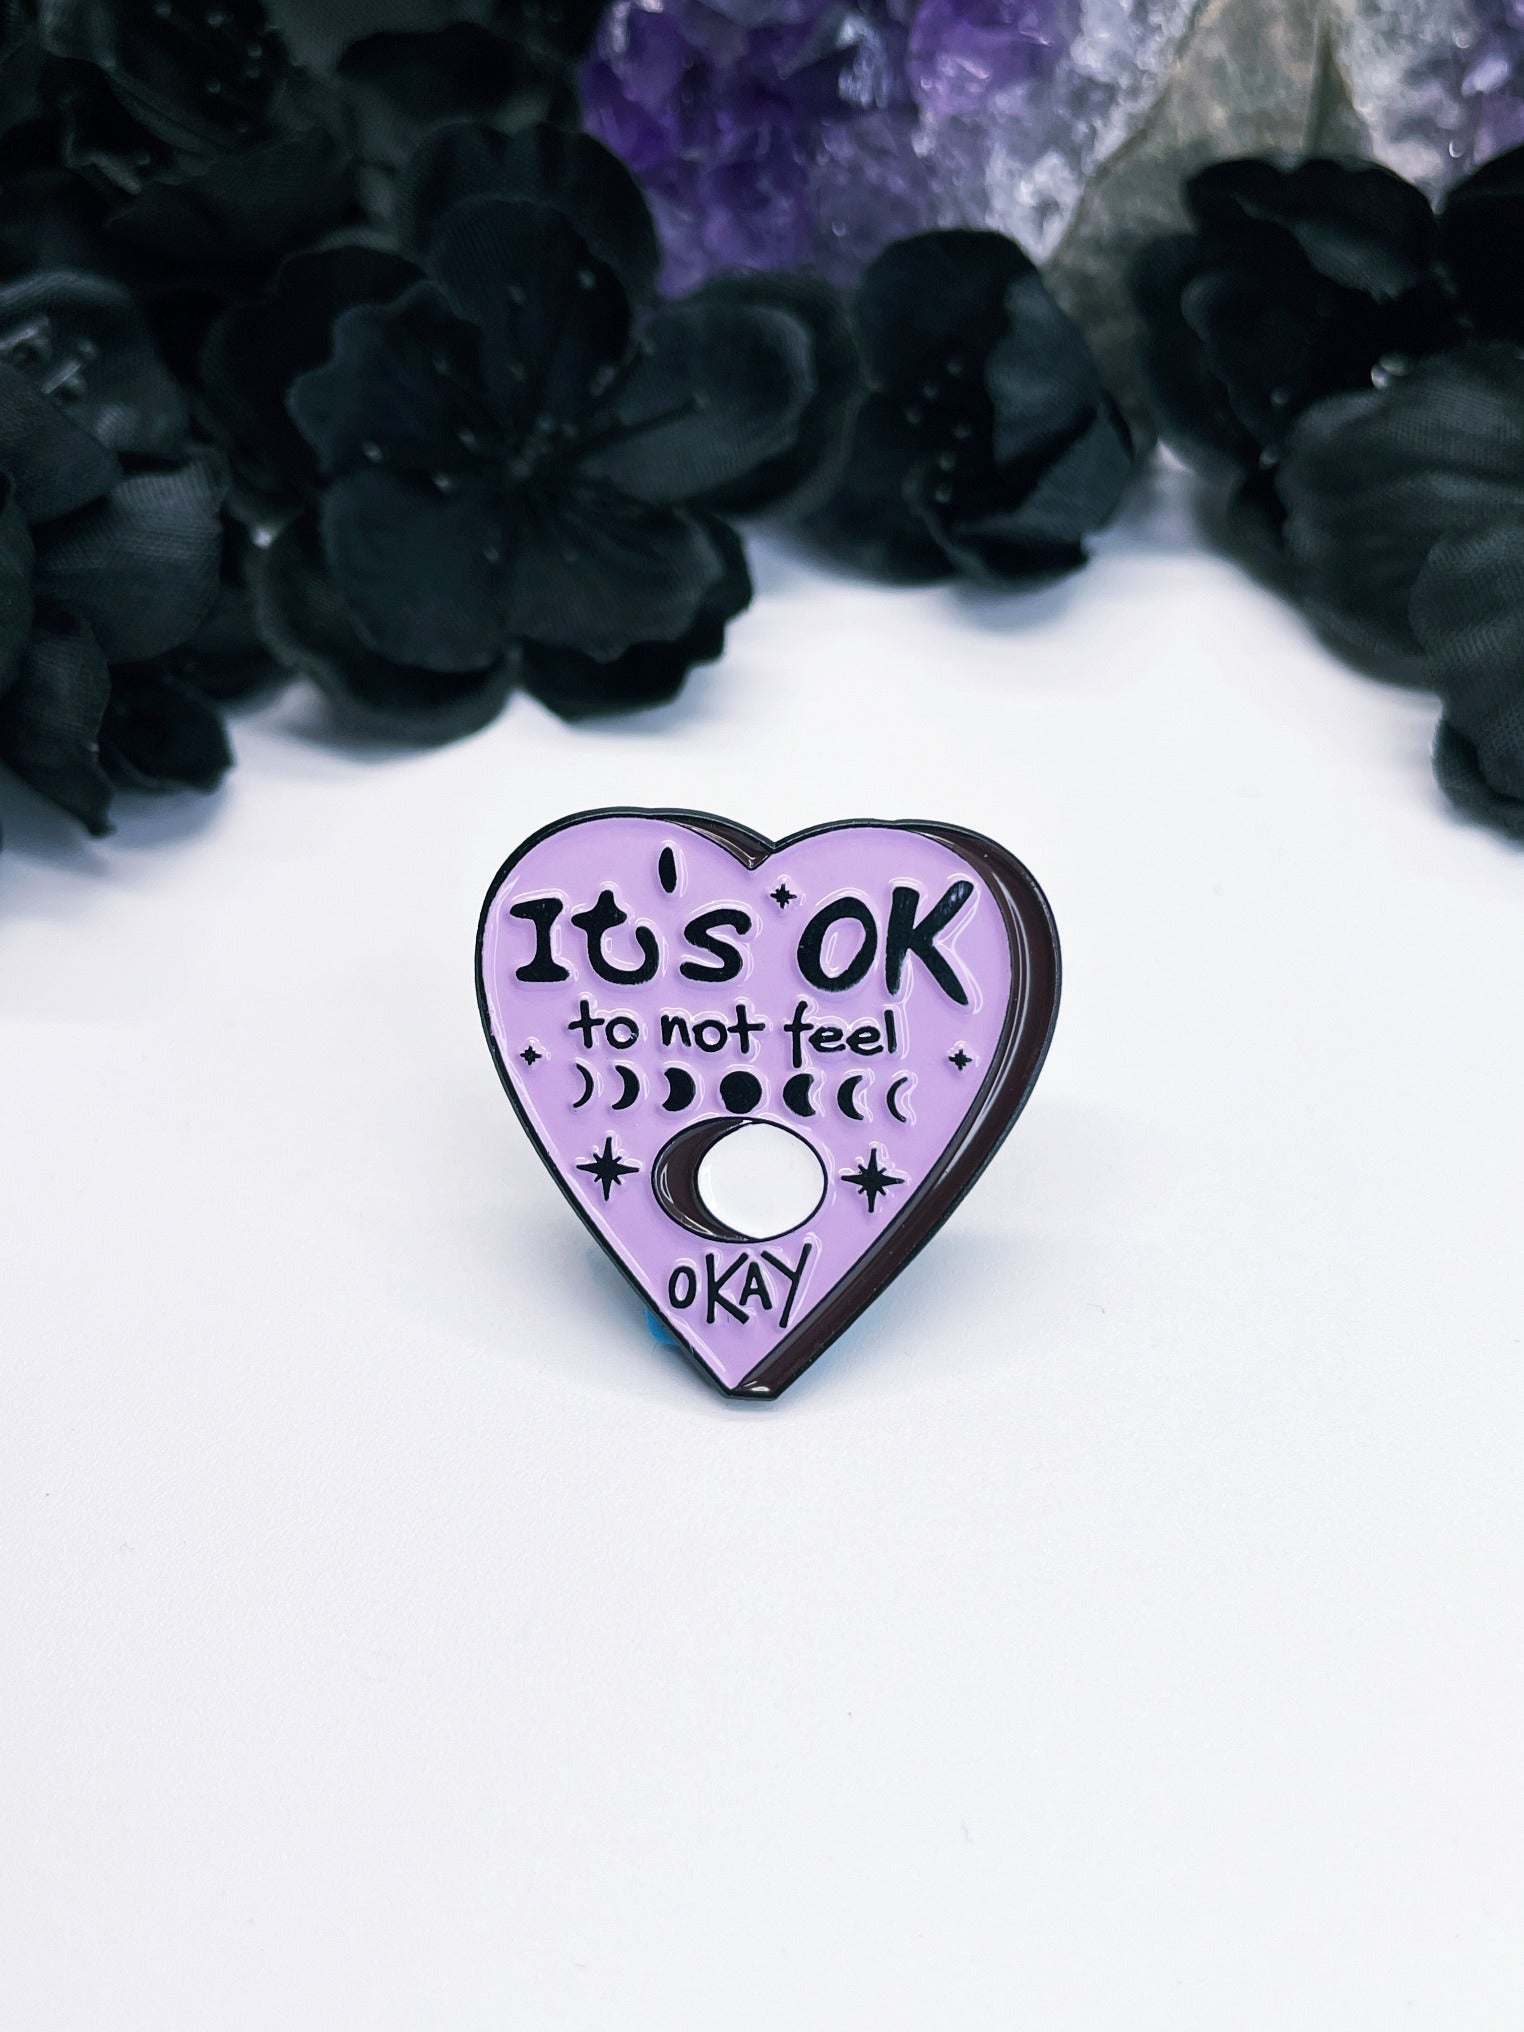 An image of an enamel pin featuring a purple heart with the words "It's Okay to Not Feel Okay" written in black letters. The pin is a simple yet powerful accessory that promotes mental health awareness and encourages people to embrace their emotions and seek help when needed. It is a meaningful and inspiring reminder for anyone who is struggling with their mental health or supporting someone who is going through a tough time.